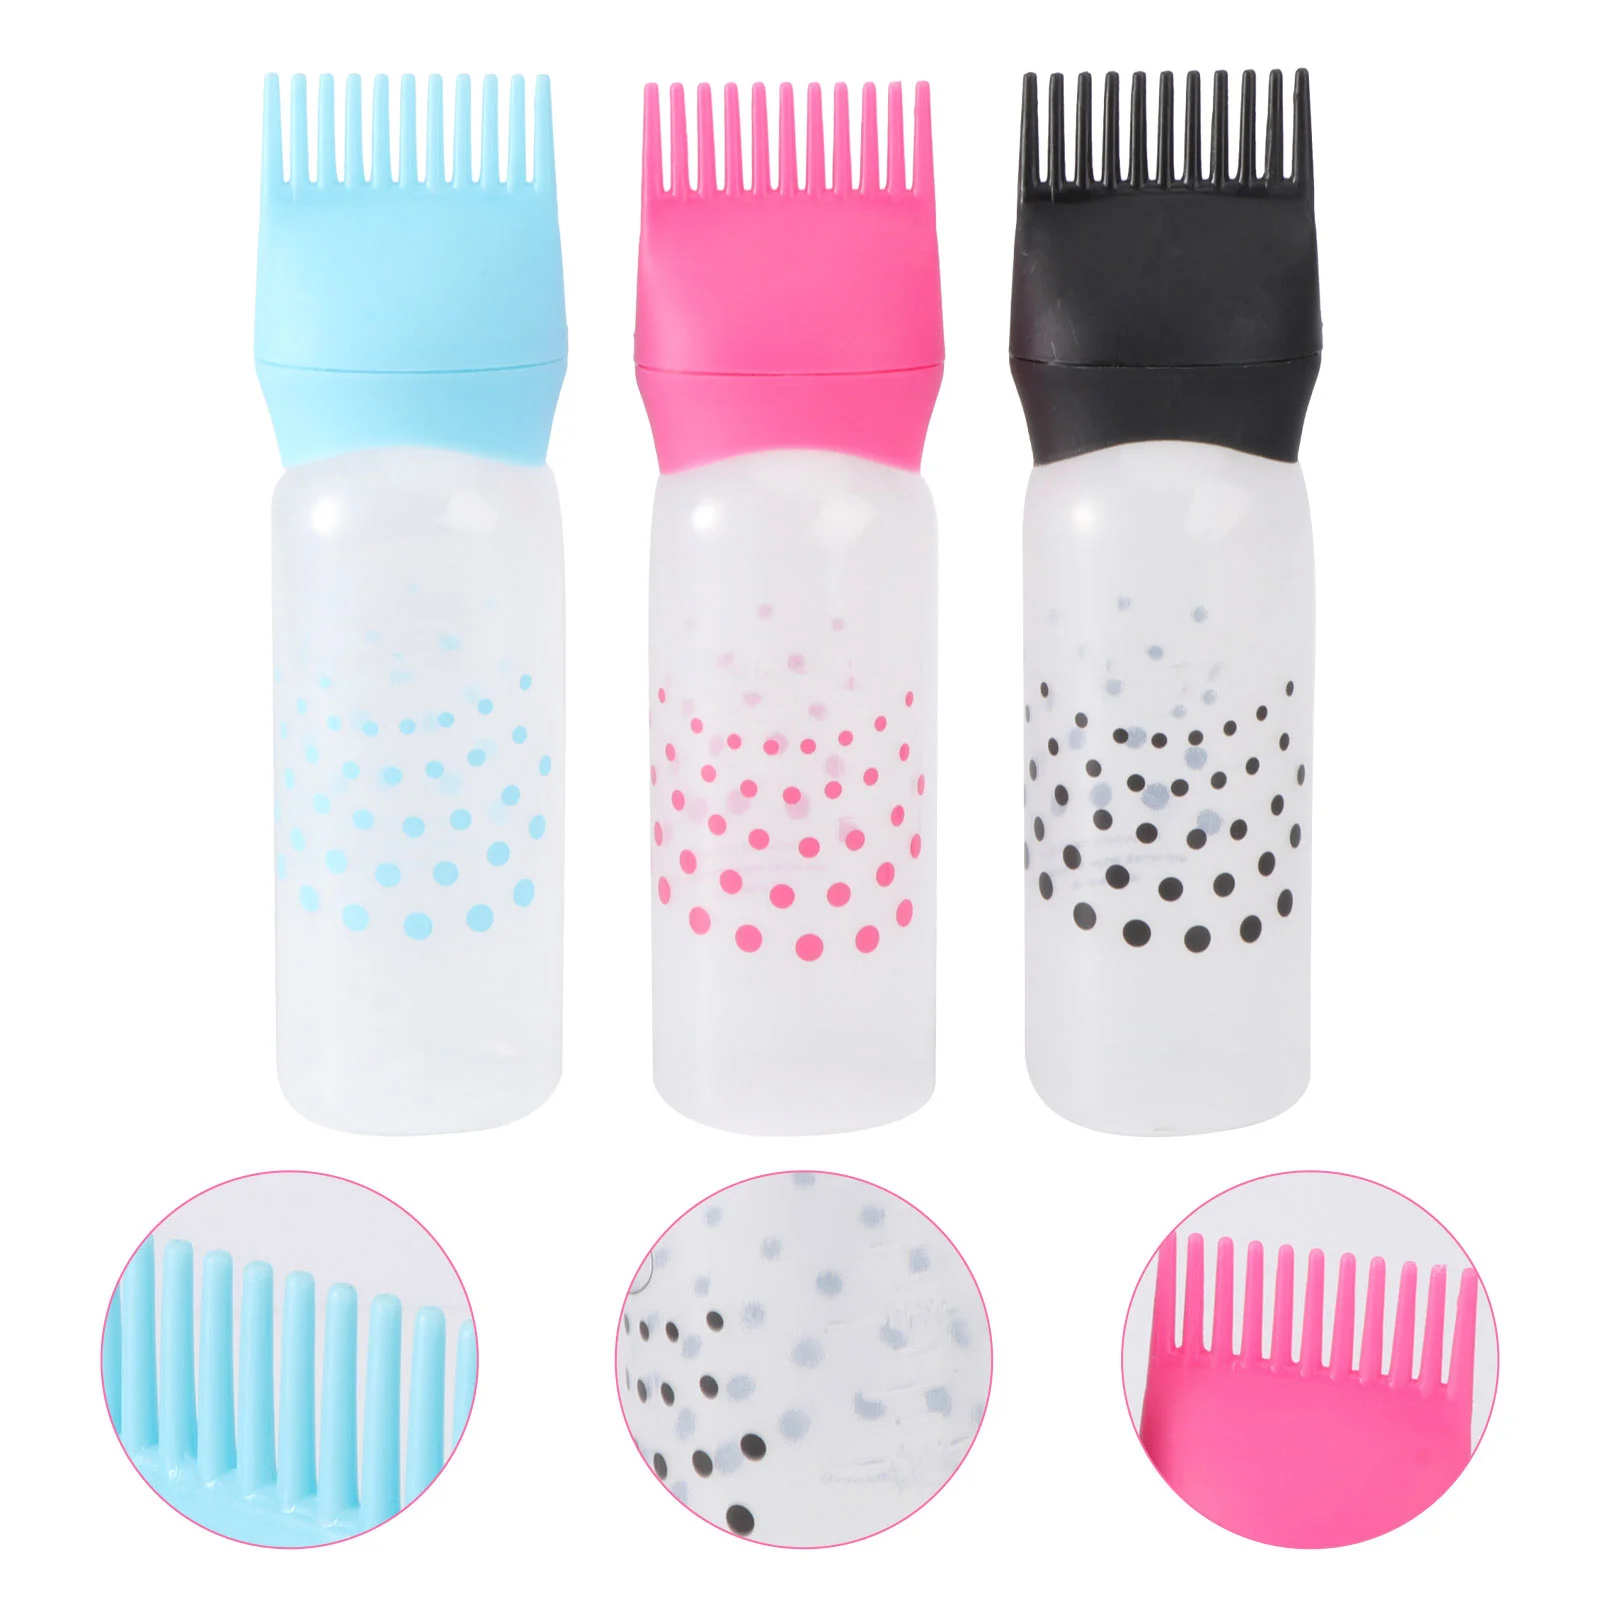 

3pcs Root Comb Applicator Bottles, Hair Dye Dispenser Bottle Applicator With Comb for Shampoo, Hair Coloring Dyeing, Scalp